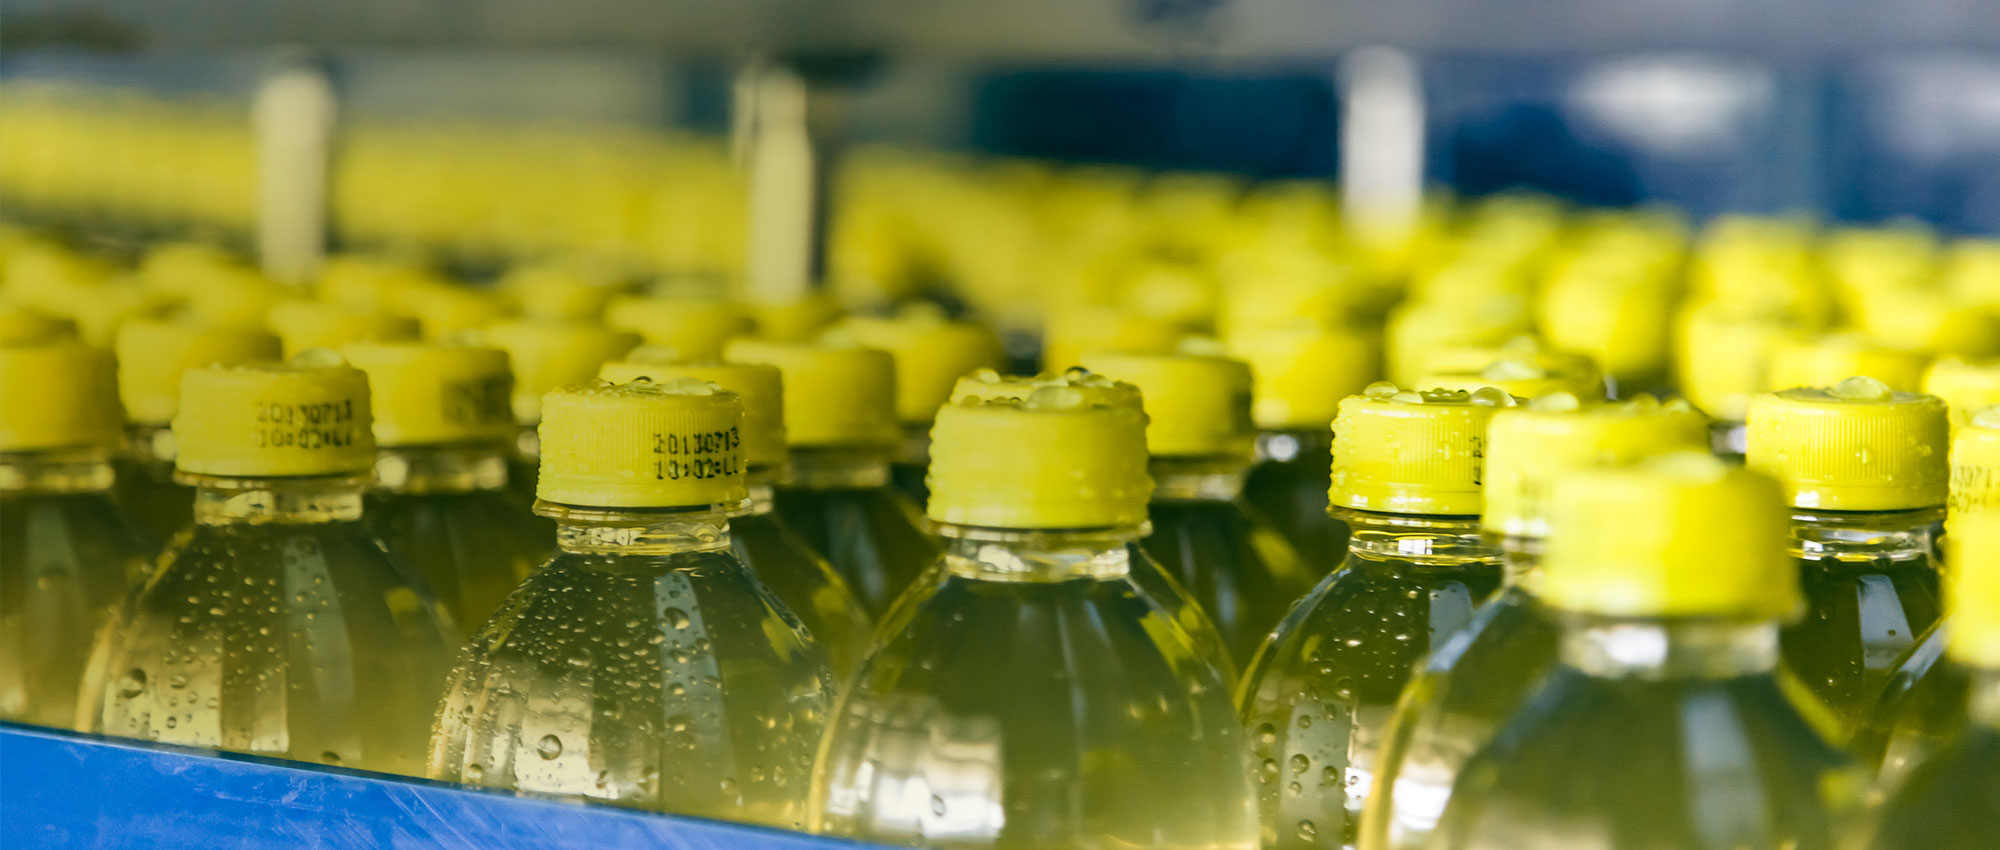 A lot of yellow bottles with yellow bottle caps. Background is blurry.